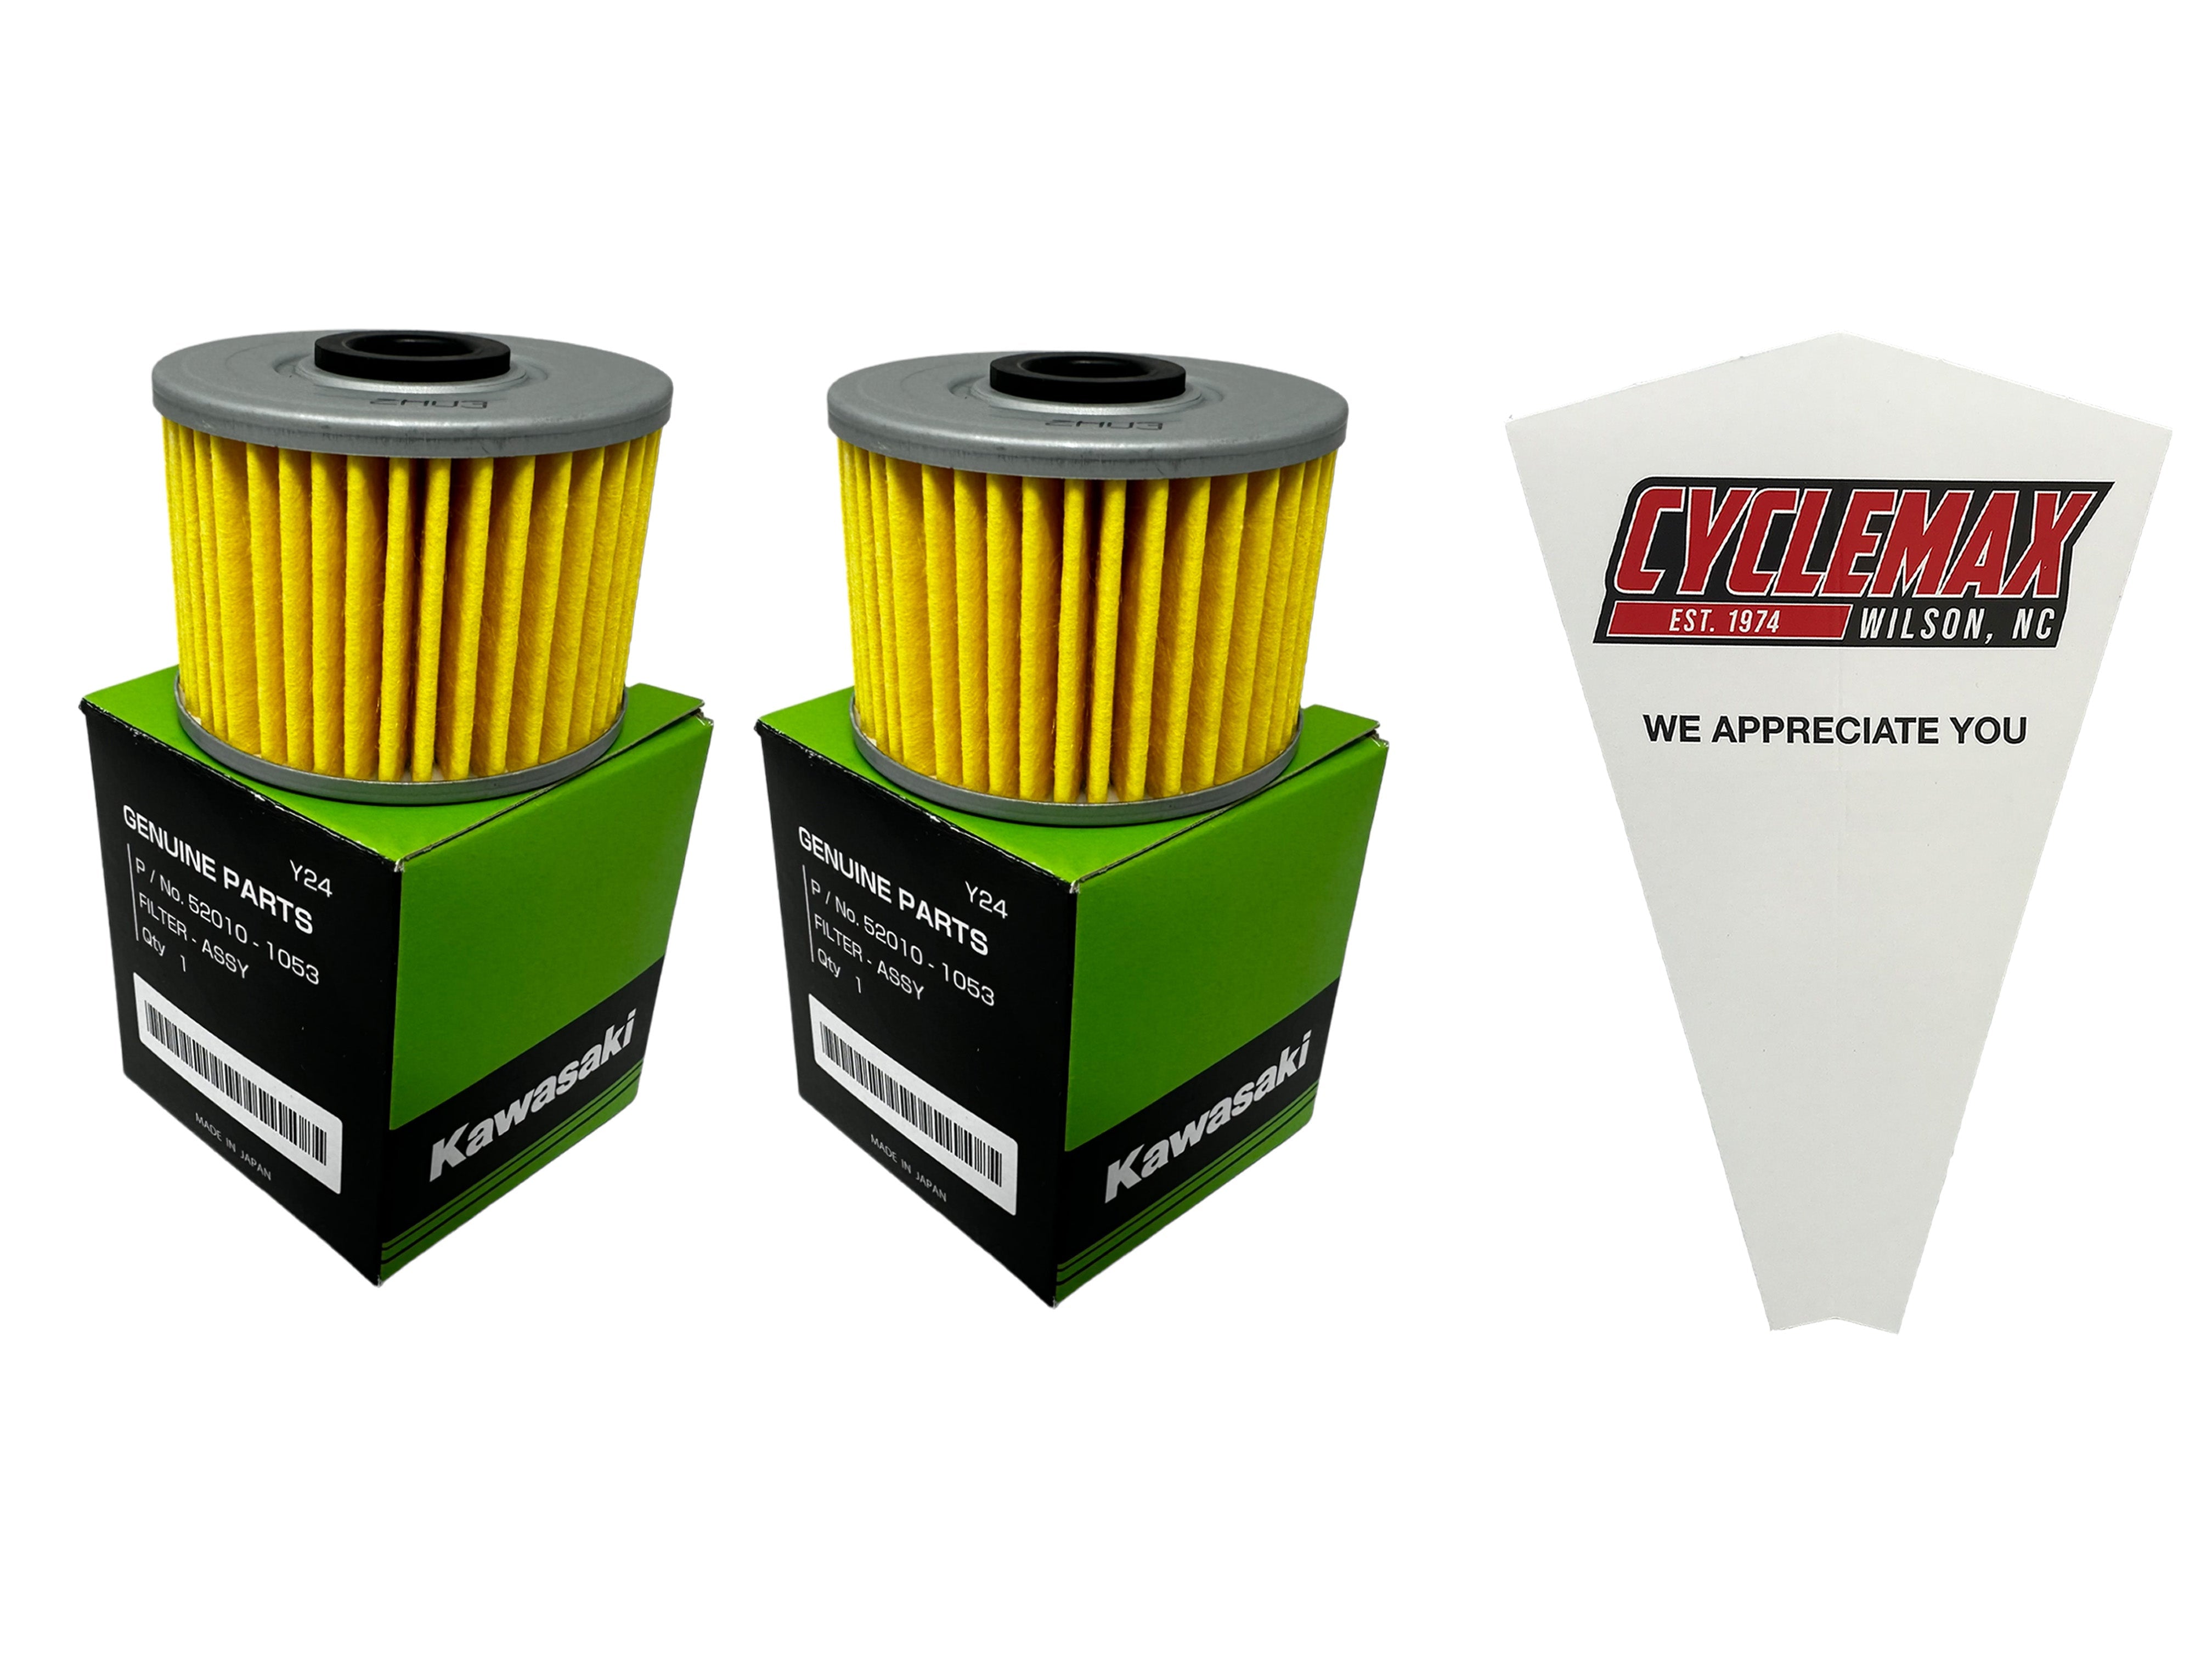 Cyclemax Two Pack for Kawasaki Oil Filter 52010-1053 Contains Two Filters and a Funnel